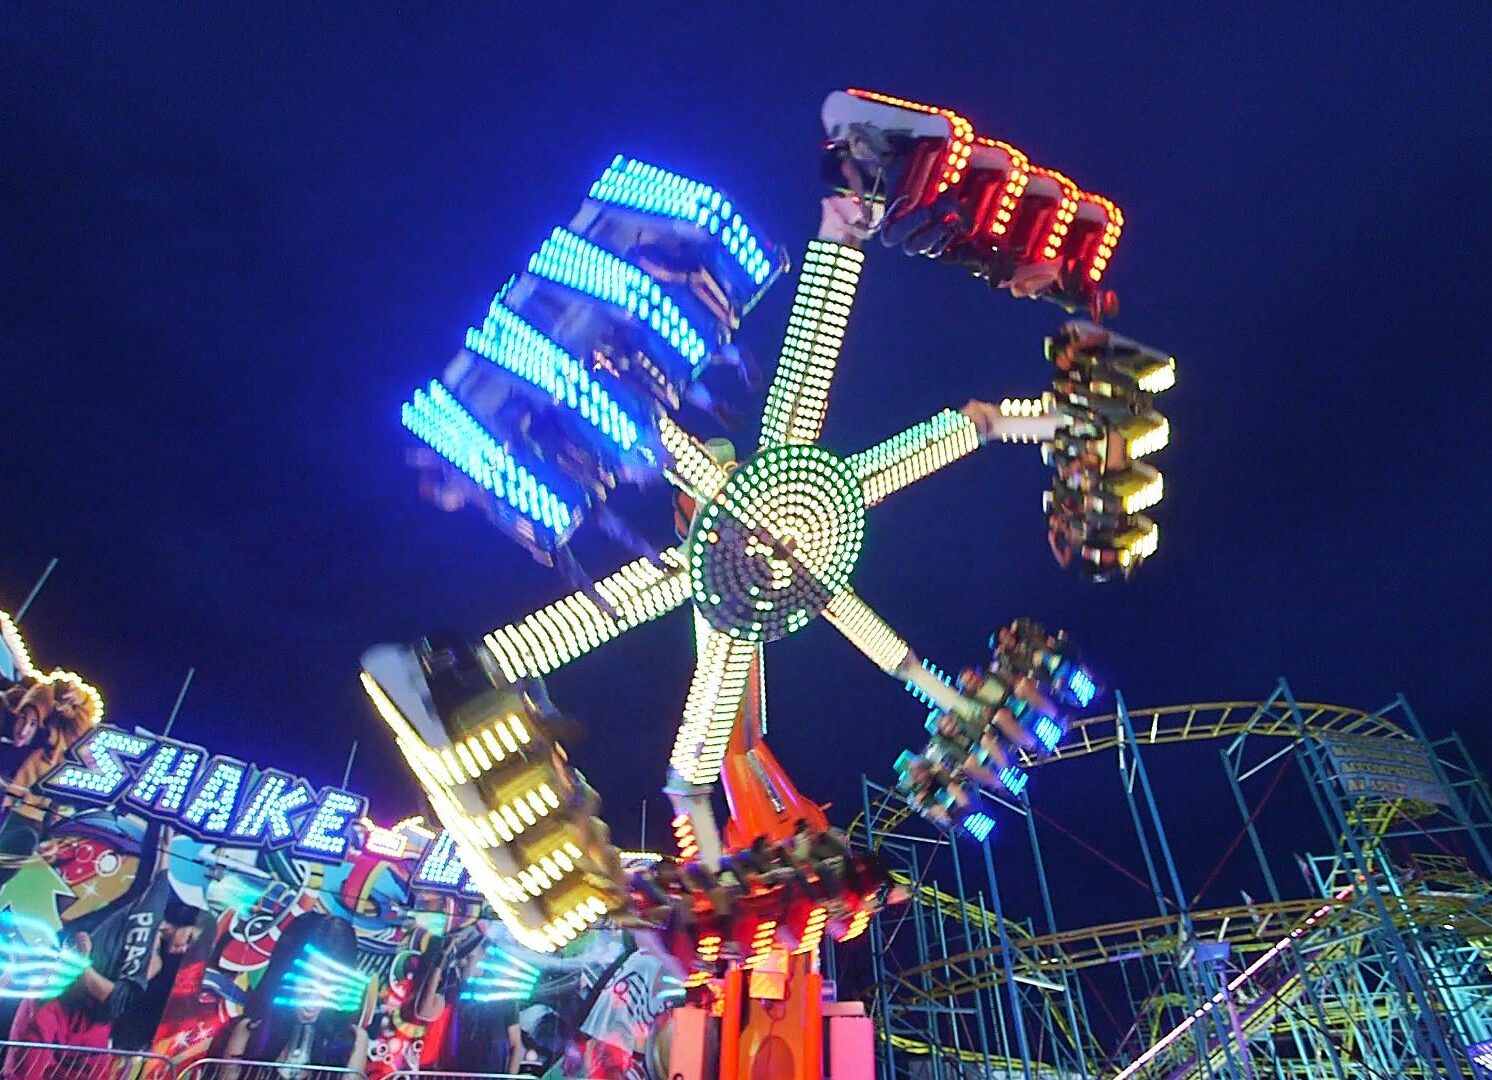 A neon-lighted spinning ride at night at Silver Dollar Fair